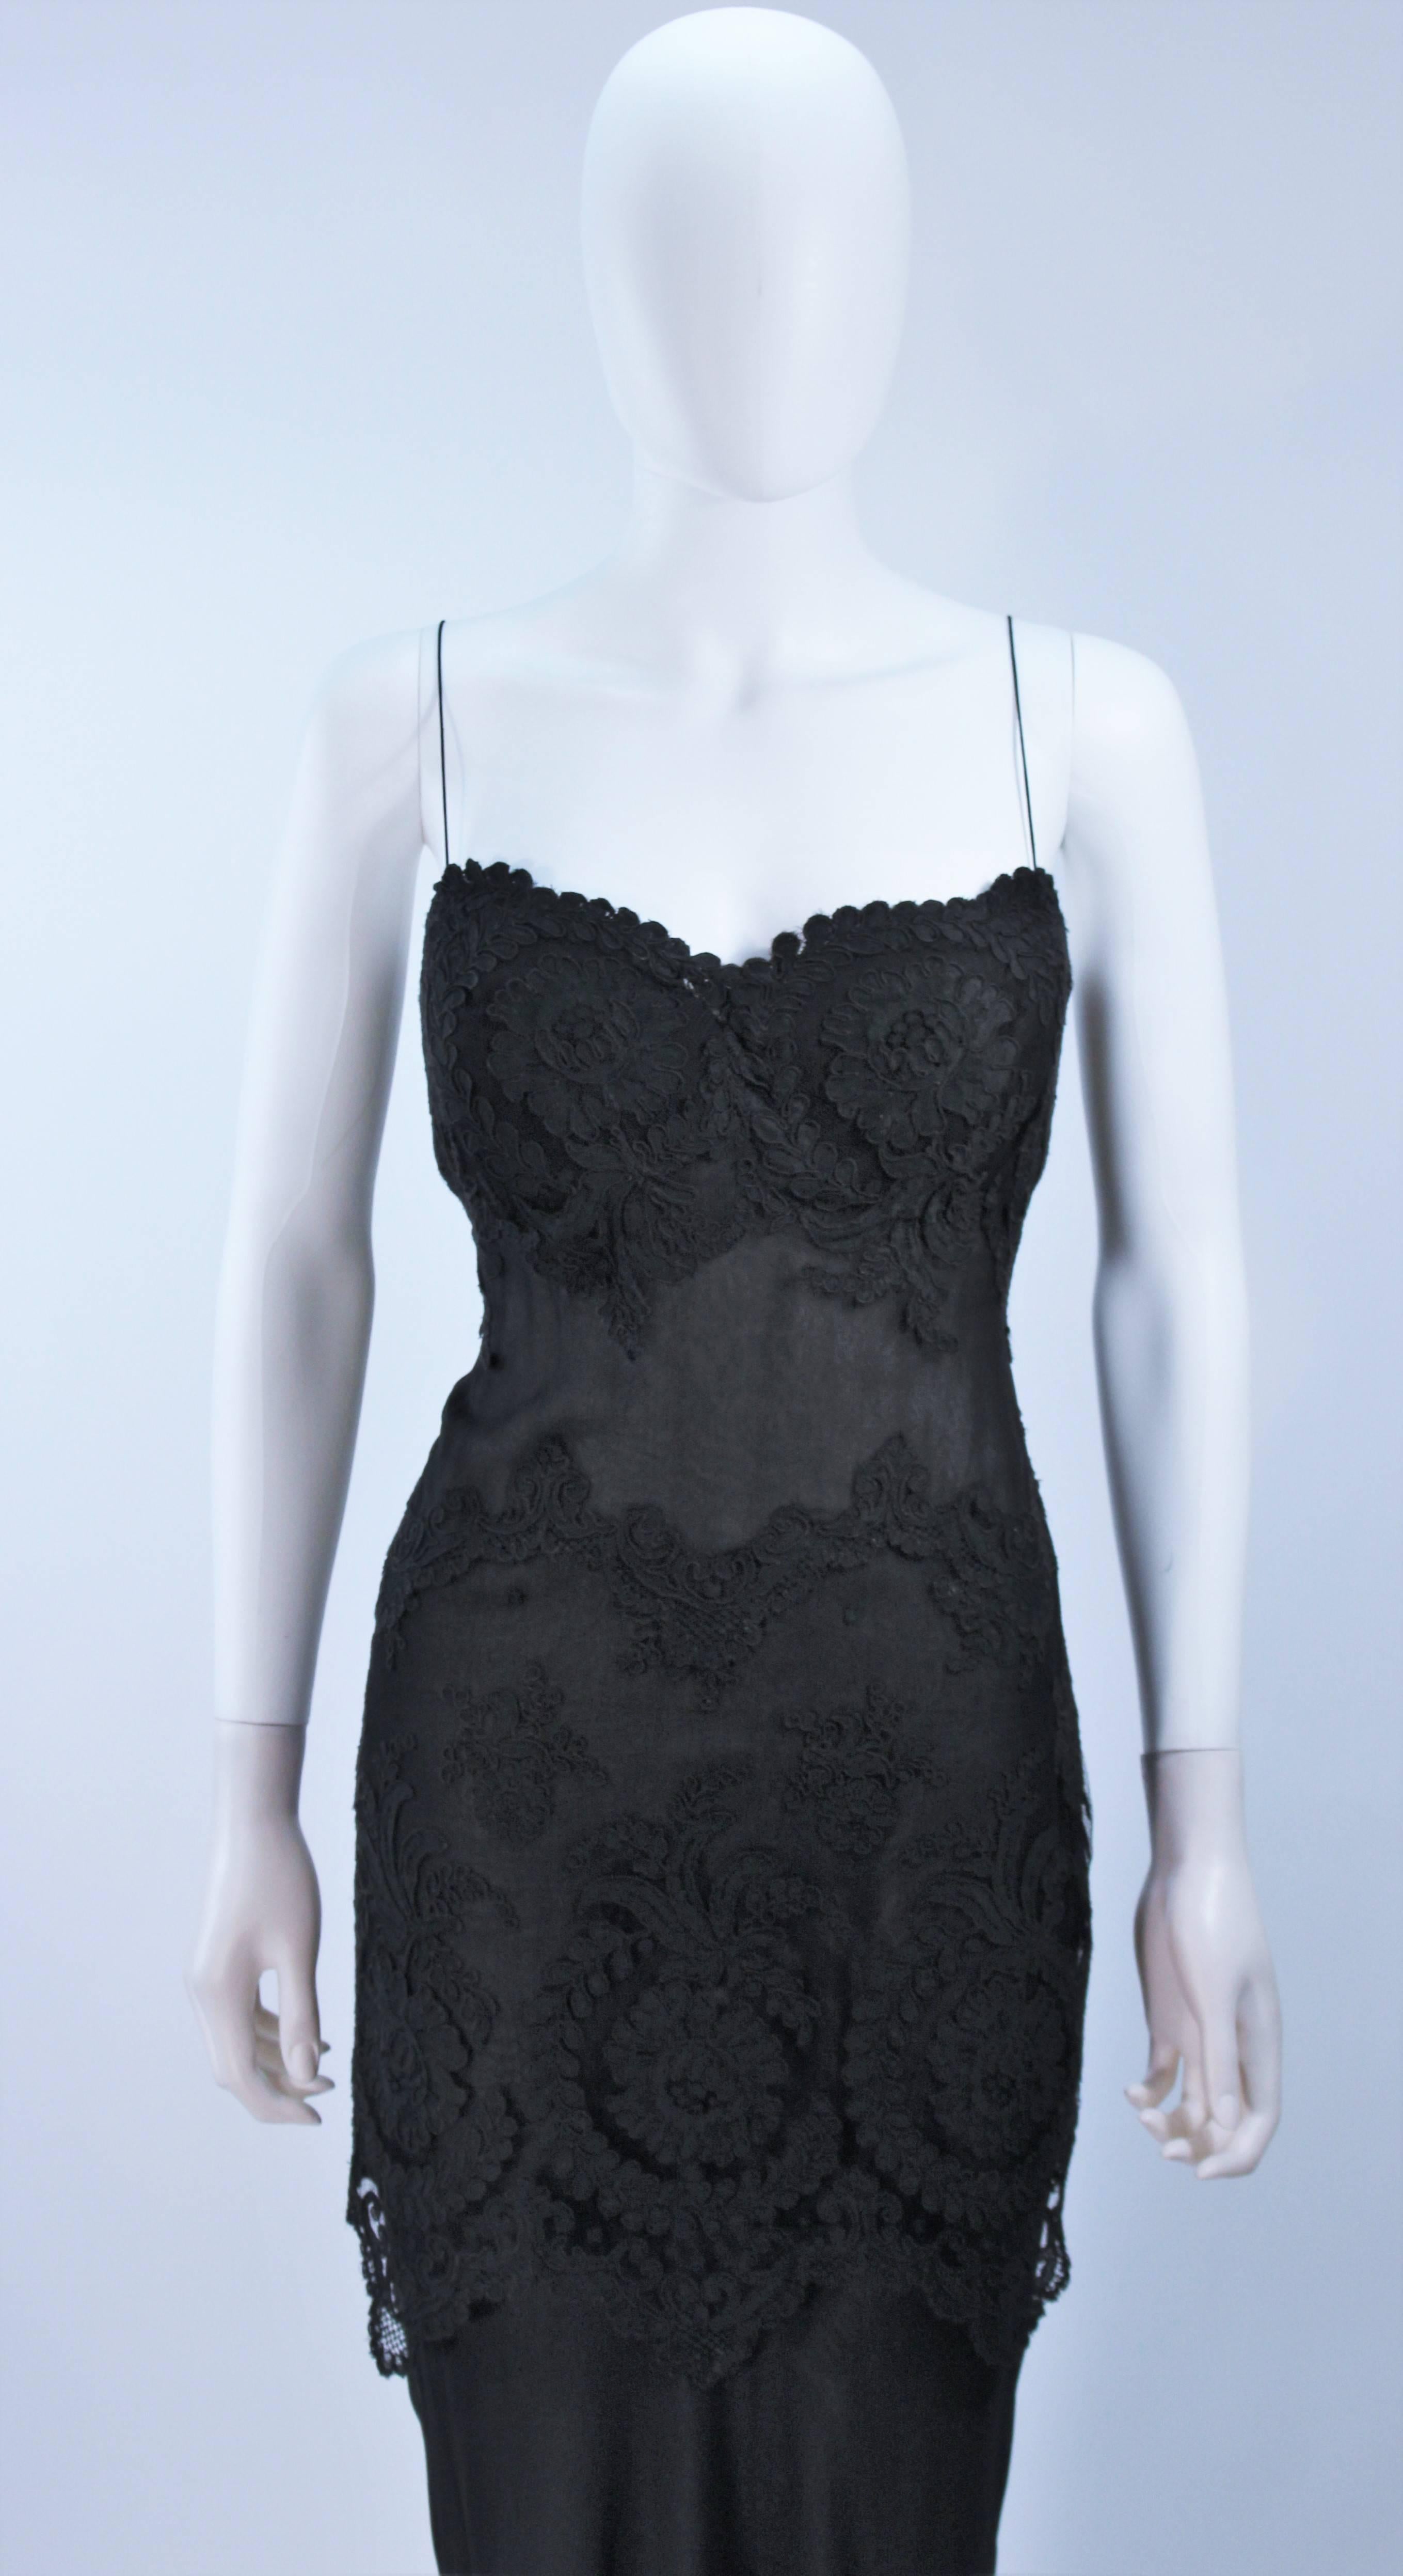  This Galanos dress is composed of a fine semi-sheer black silk chiffon with a lace applique. There is a center back zipper closure. In excellent vintage condition. 

  **Please cross-reference measurements for personal accuracy.

Measures